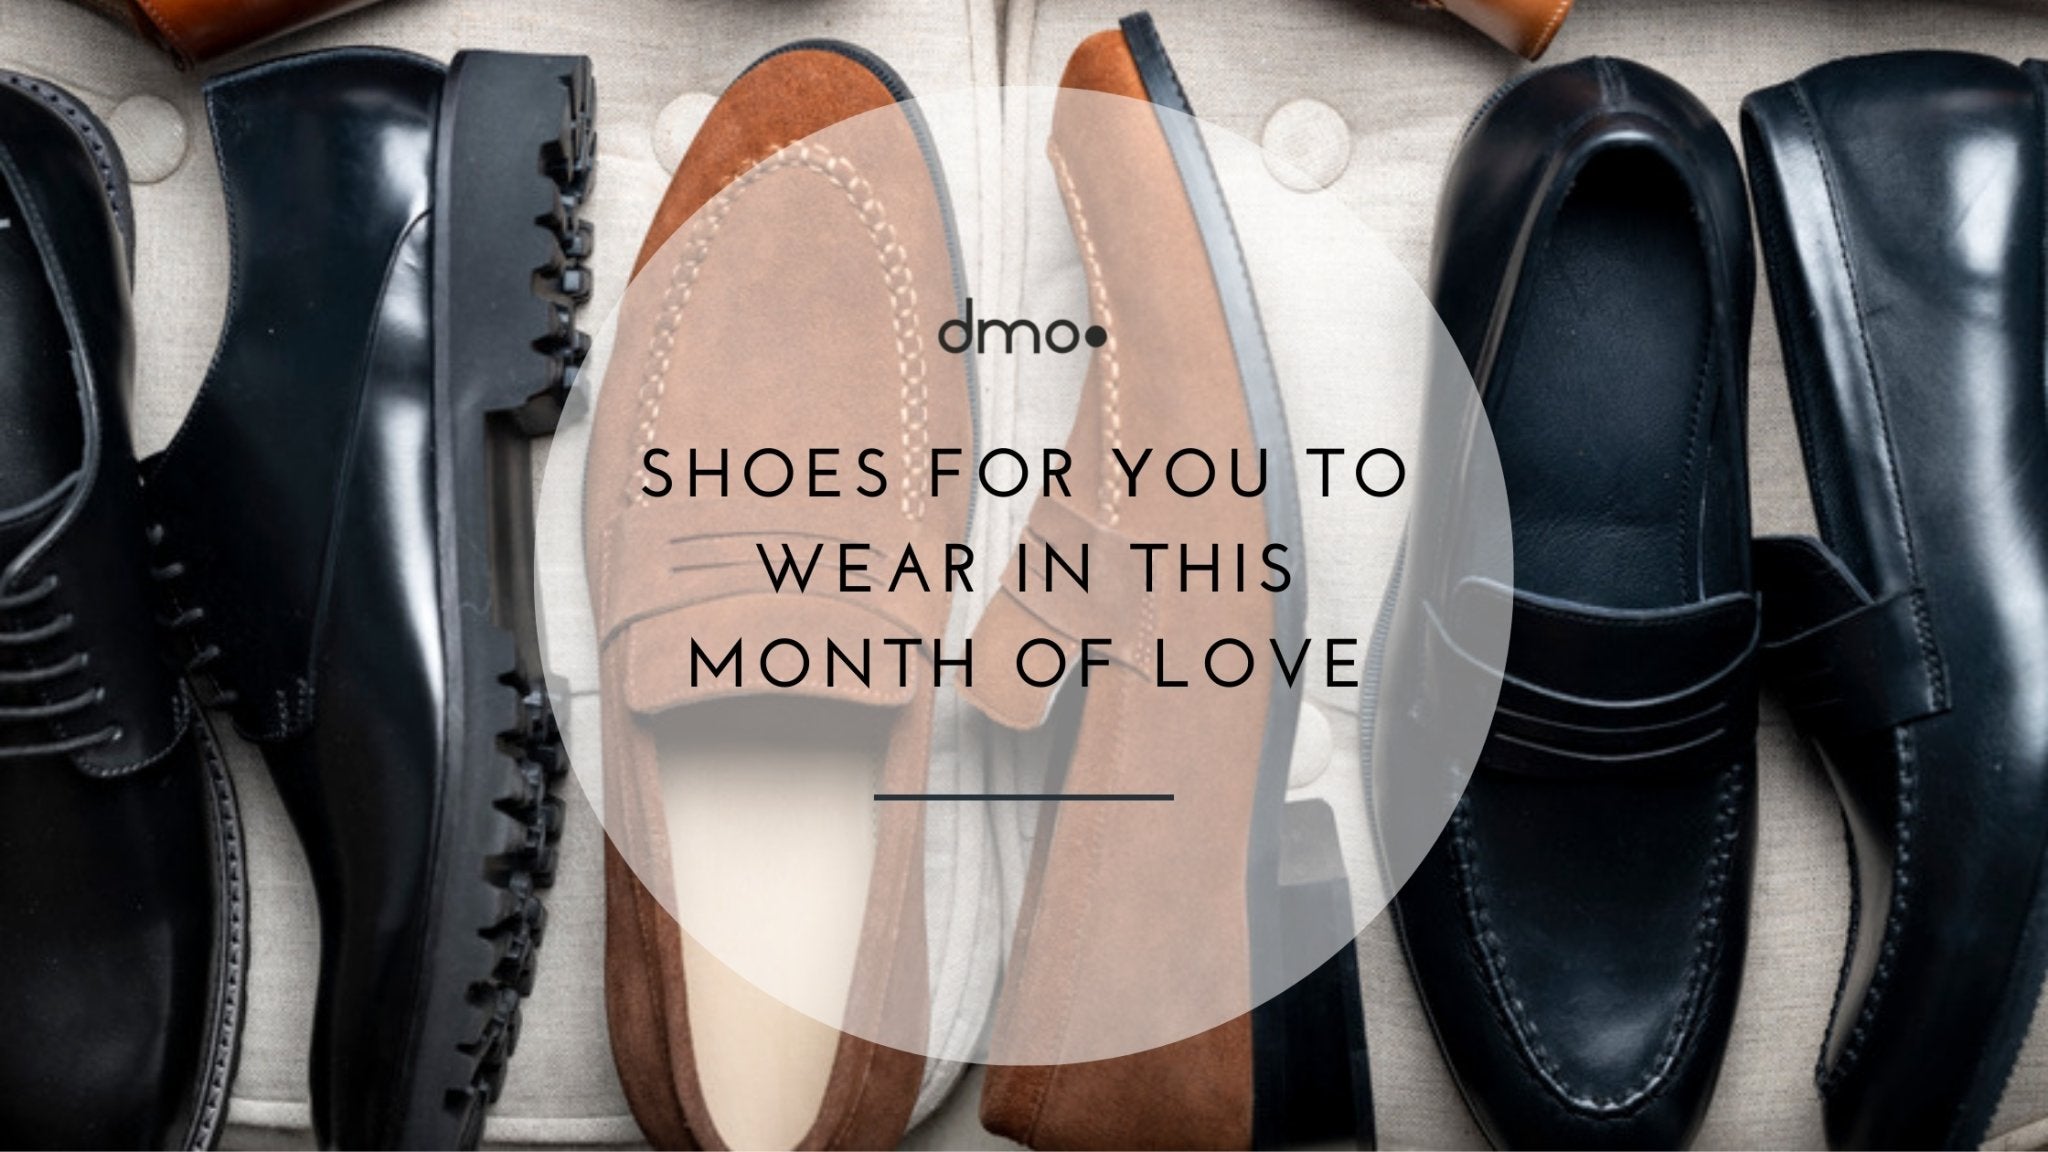 Shoes for you to wear in this month of love - dmodot Shoes